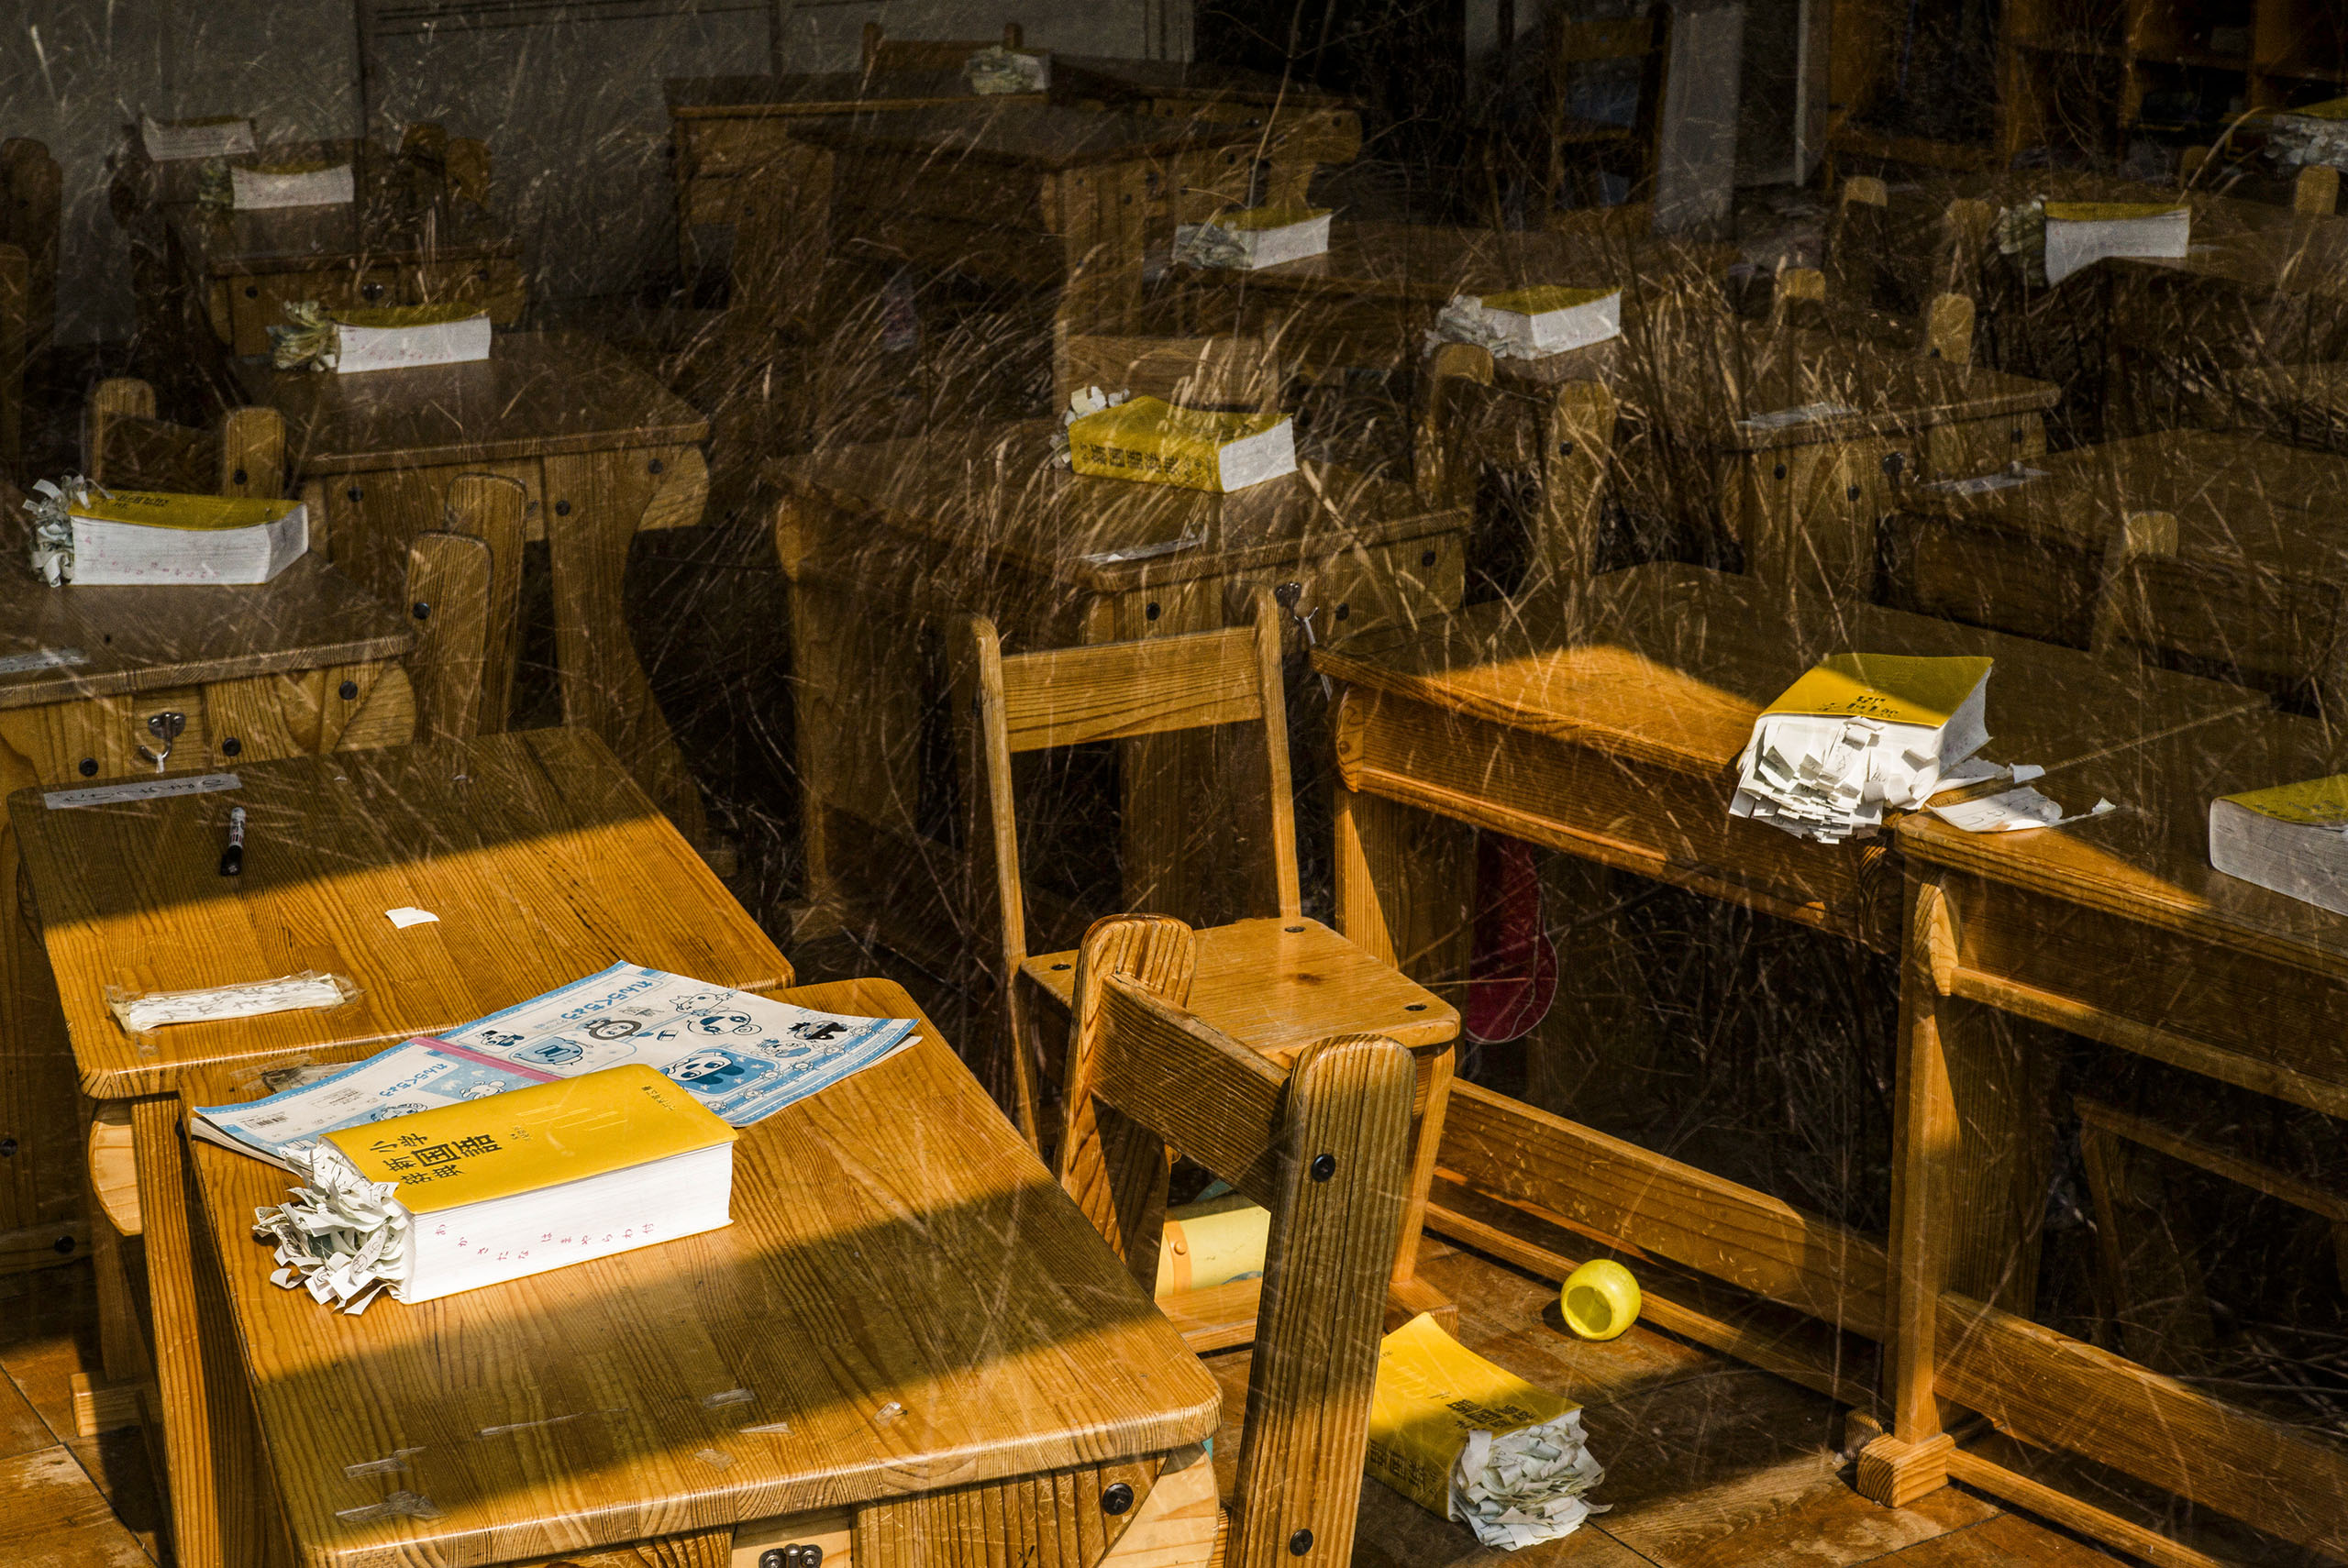 Japanese dictionaries for first-graders remain inside a classroom at the abandoned Kumano Elementary School in Okuma, Japan, March 4, 2016. The school lies within the 5km exclusion zone around the Fukushima Daiichi nuclear power plant.